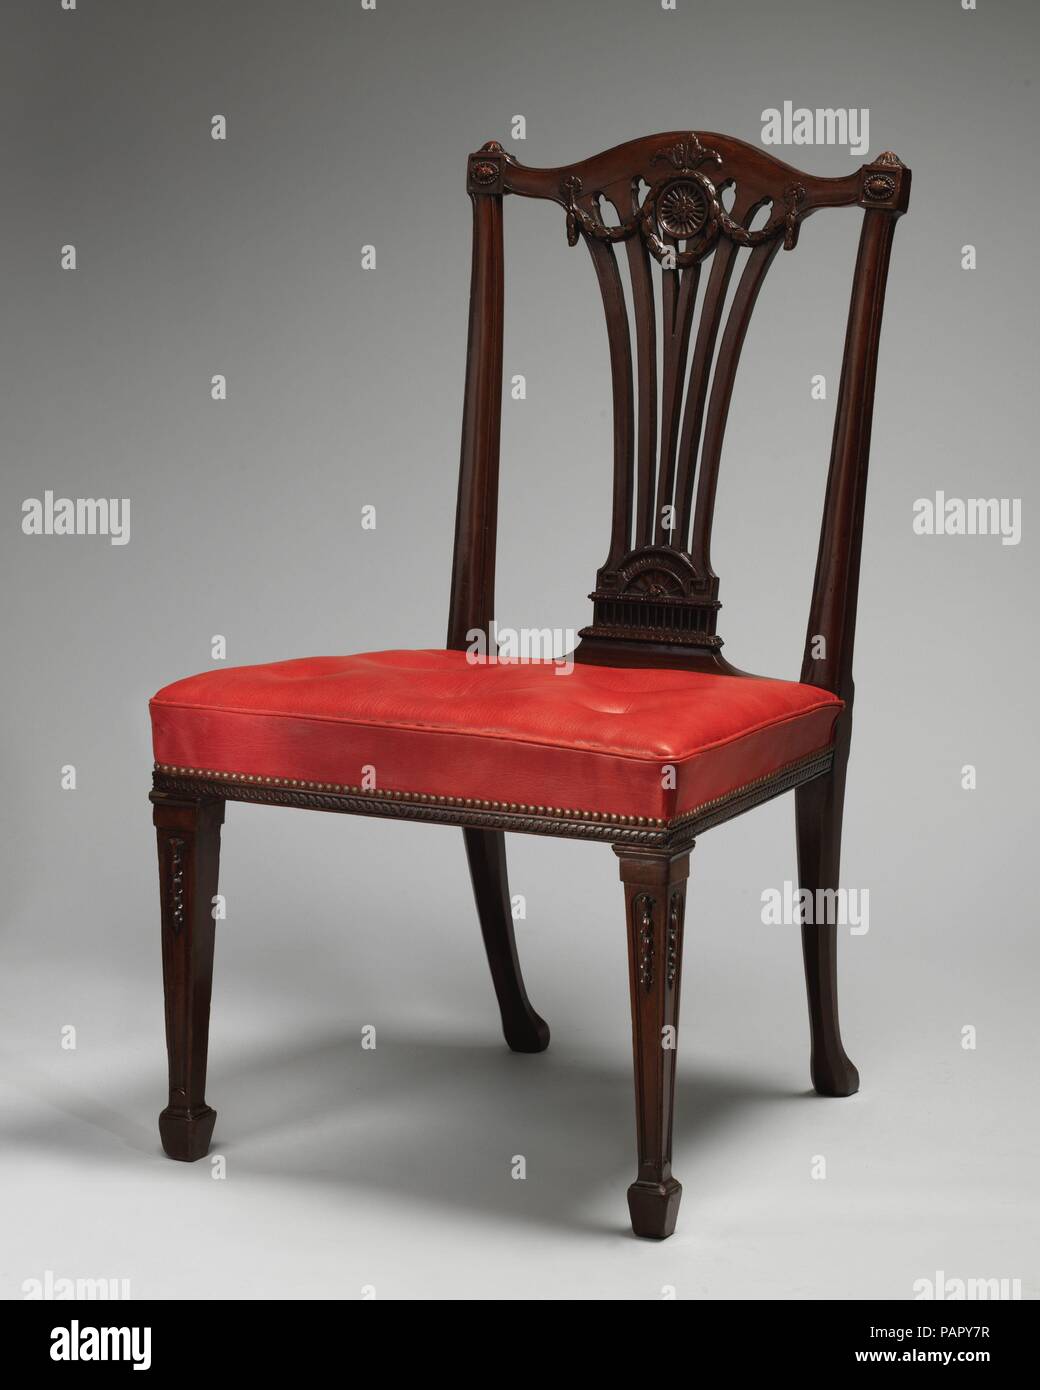 Set of fourteen side chairs. Culture: British. Dimensions: Overall (each): 38 1/4 × 22 × 22 1/2 in. (97.2 × 55.9 × 57.2 cm). Maker: Thomas Chippendale (British, baptised Otley, West Yorkshire 1718-1779 London). Date: ca. 1772.  Chippendale executed this set of Neoclassical mahogany dining chairs for Goldsborough Hall, in Yorkshire, which belonged to Daniel Lascelles, younger brother of Chippendale's most extravagant patron, Edwin Lascelles, of nearby Harewood House. The set, which originally included fifteen chairs, remained at Goldsborough until 1929, when it was removed to Harewood House, fr Stock Photo